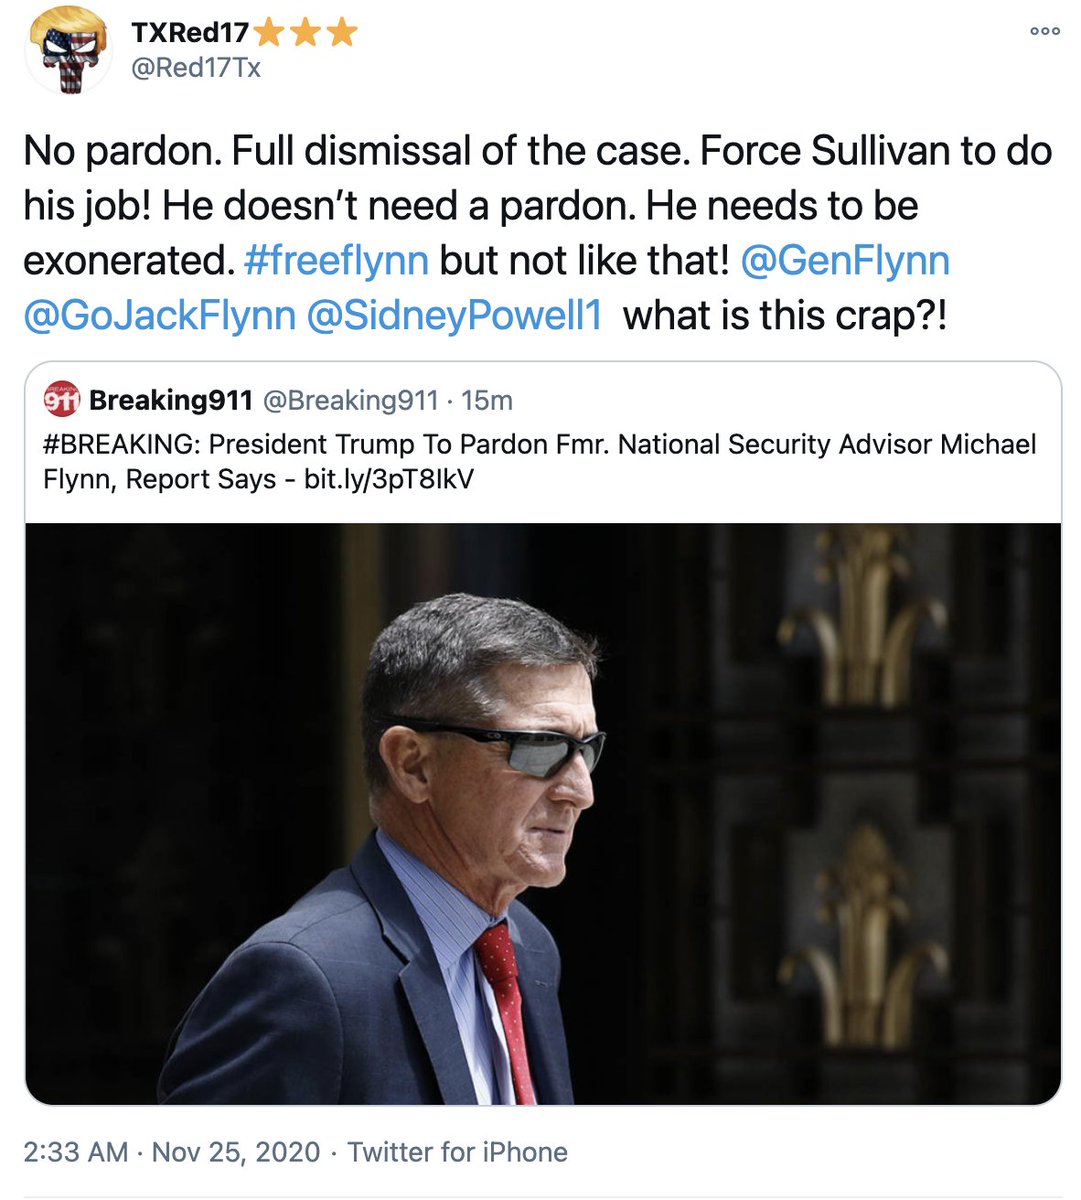 QAnon supporters are excited about the news that President Trump may pardon Gen Michael Flynn, but they think a pardon implies guilt and he should simply be exonerated.Gen Flynn is widely admired by QAnon followers. He took the QAnon "oath" with his family back in the summer.